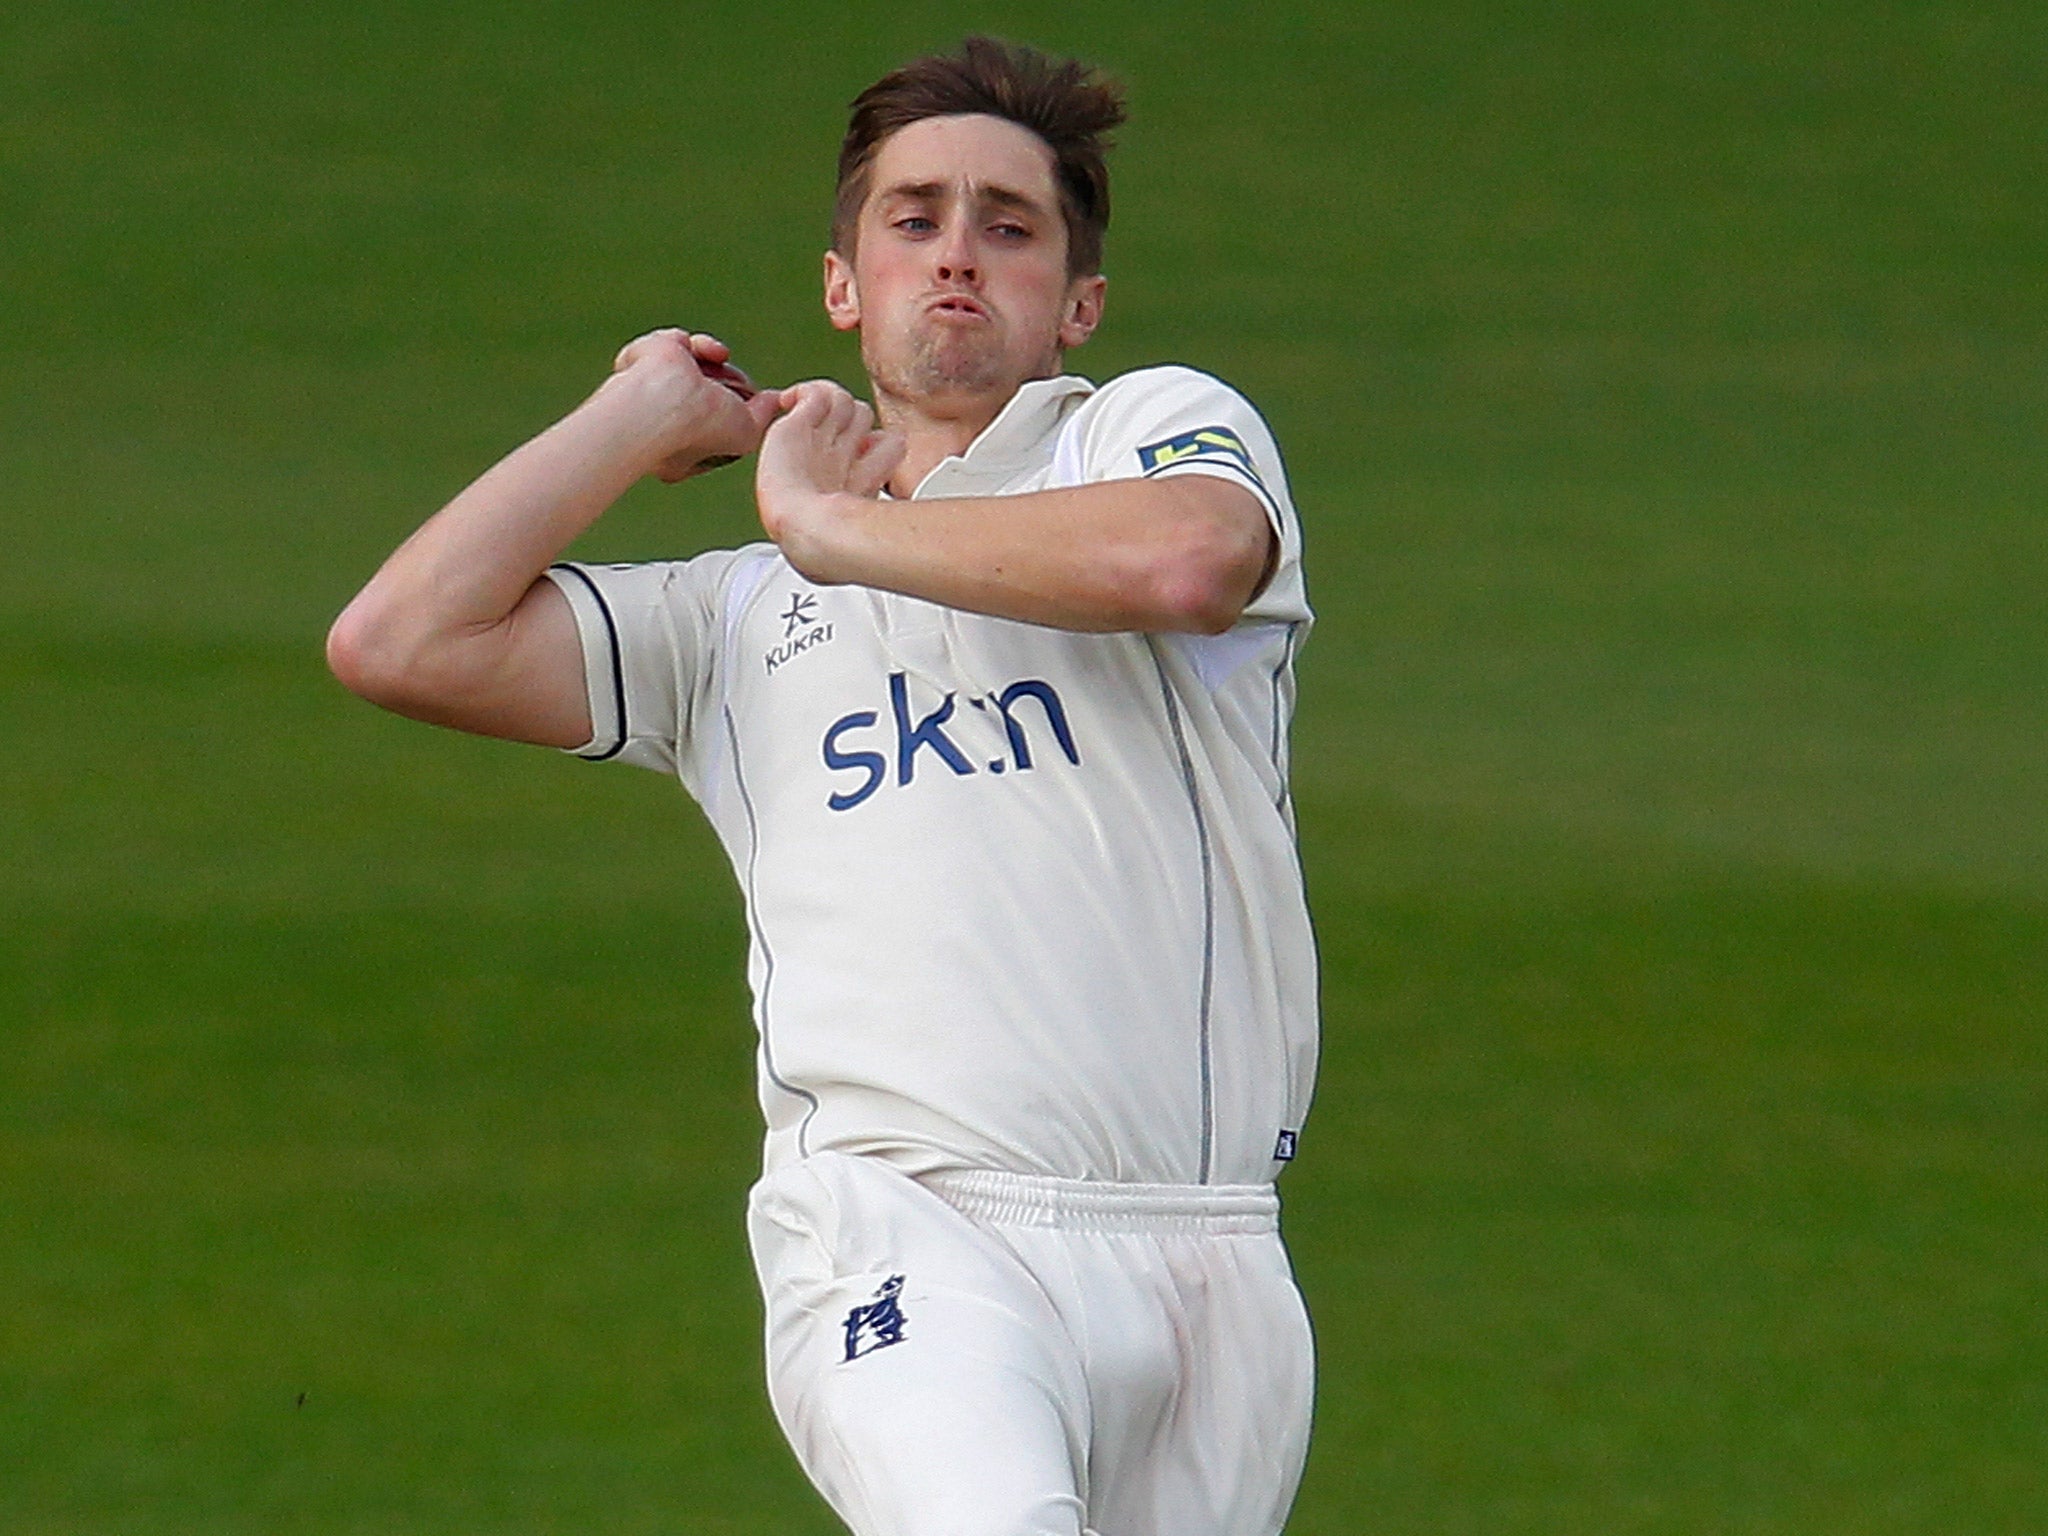 Chris Woakes nudged the England selectors with a season-best 5 for 35